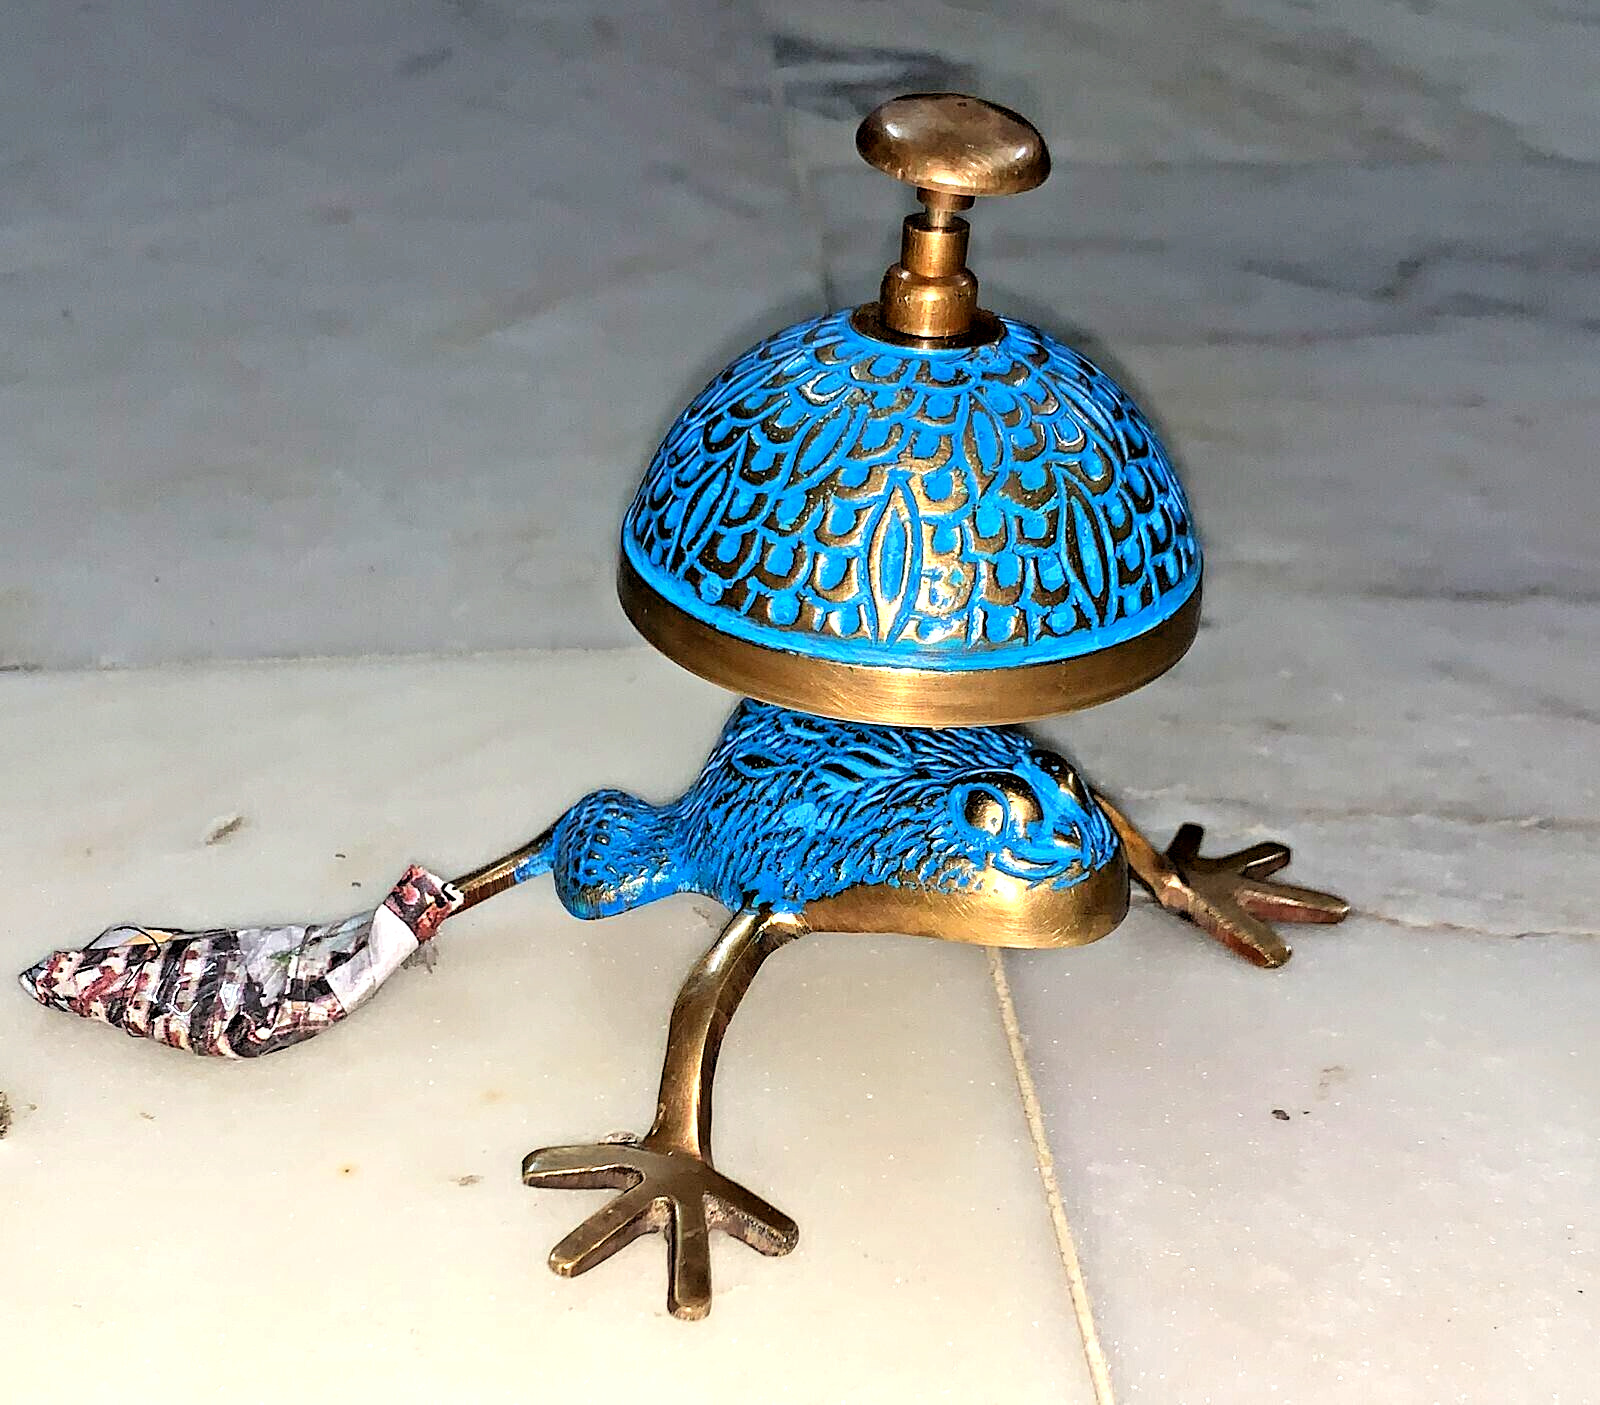 Nautical Brass Frog Style Desk Bell in Blue -Antique Replica Designer Call Bell